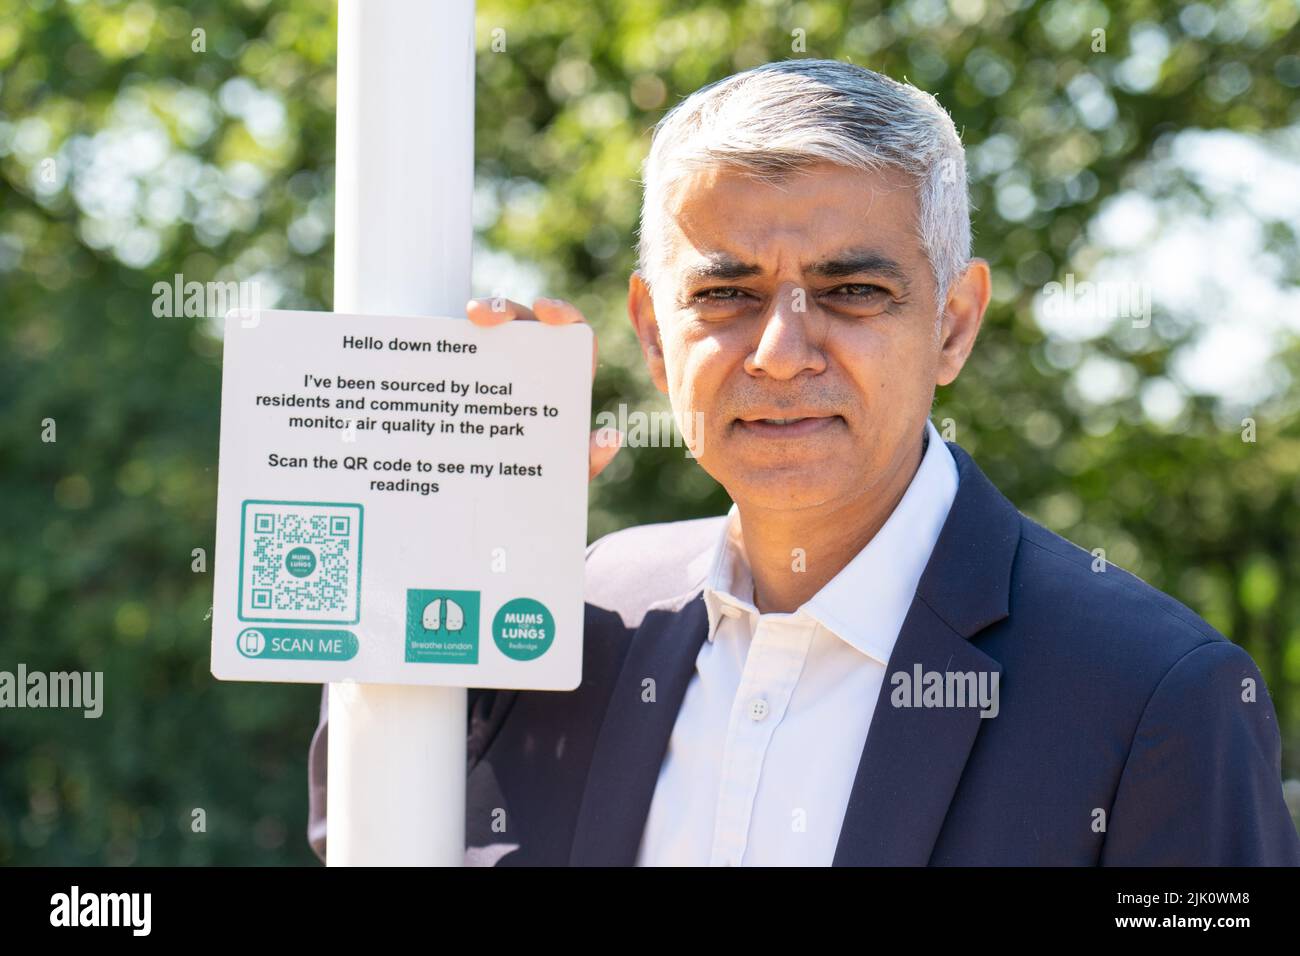 Mayor of London Sadiq Khan with an air quality monitoring station sign during a visit to Mums for Lungs community group in South Woodford, London, to coincide with the final day of the ULEZ expansion consultation and the publishing of new air quality data. Picture date: Friday July 29, 2022. Stock Photo